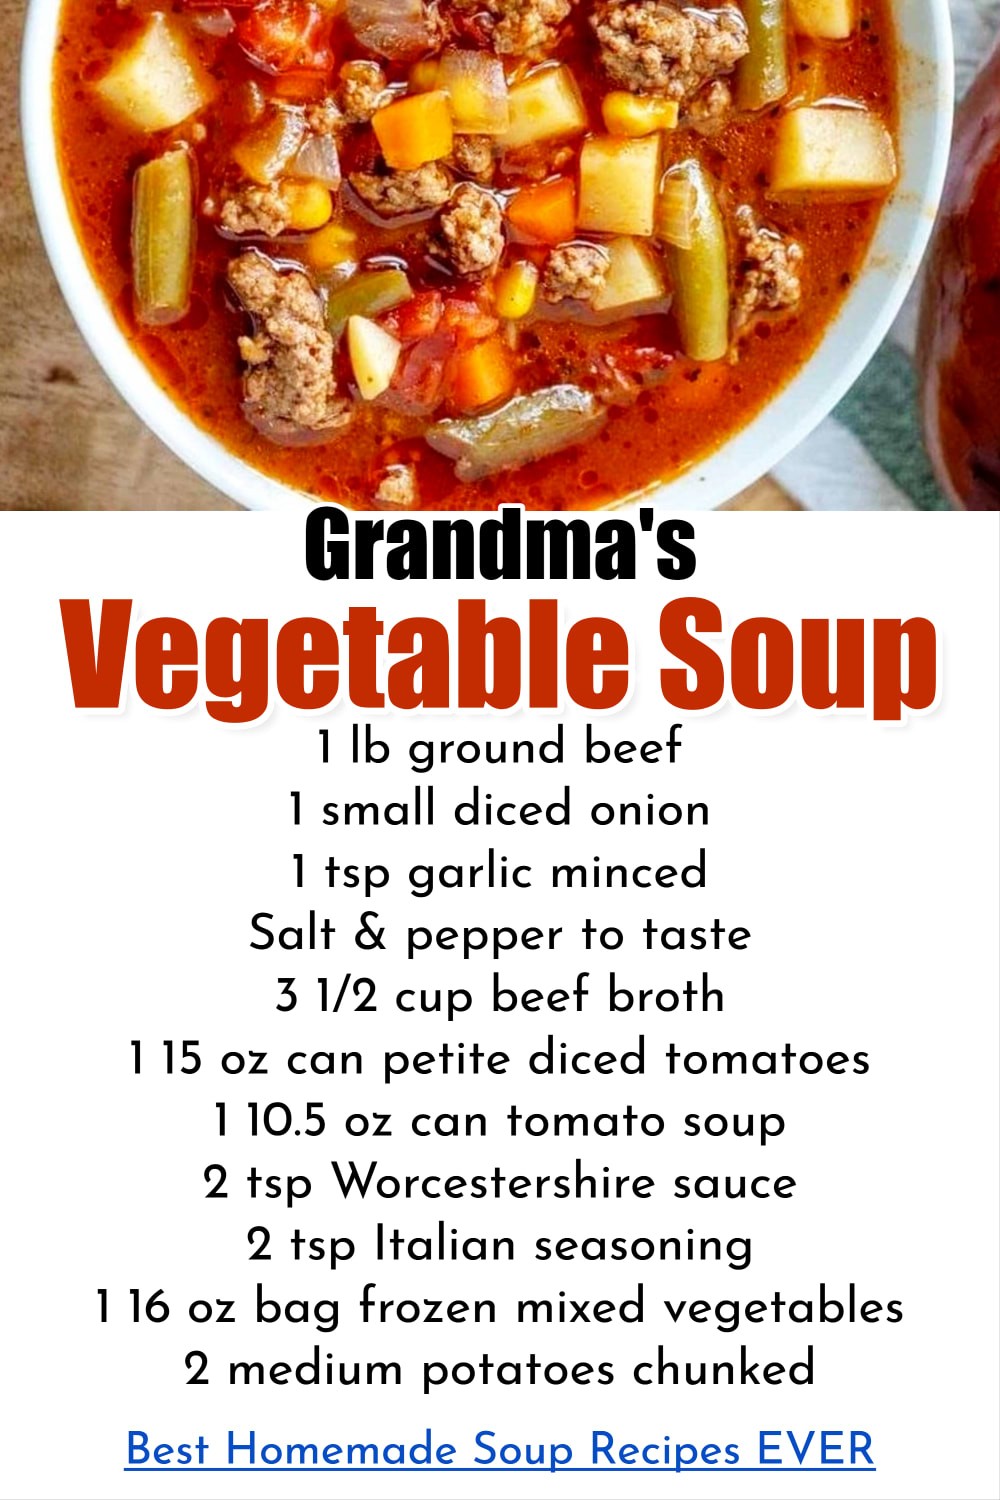 Homemade Soup Recipes - My Grandma's Homemade Old-Fashioned Vegetable Soup Recipes for cold winter nights - Best homemade soup recipes EVER